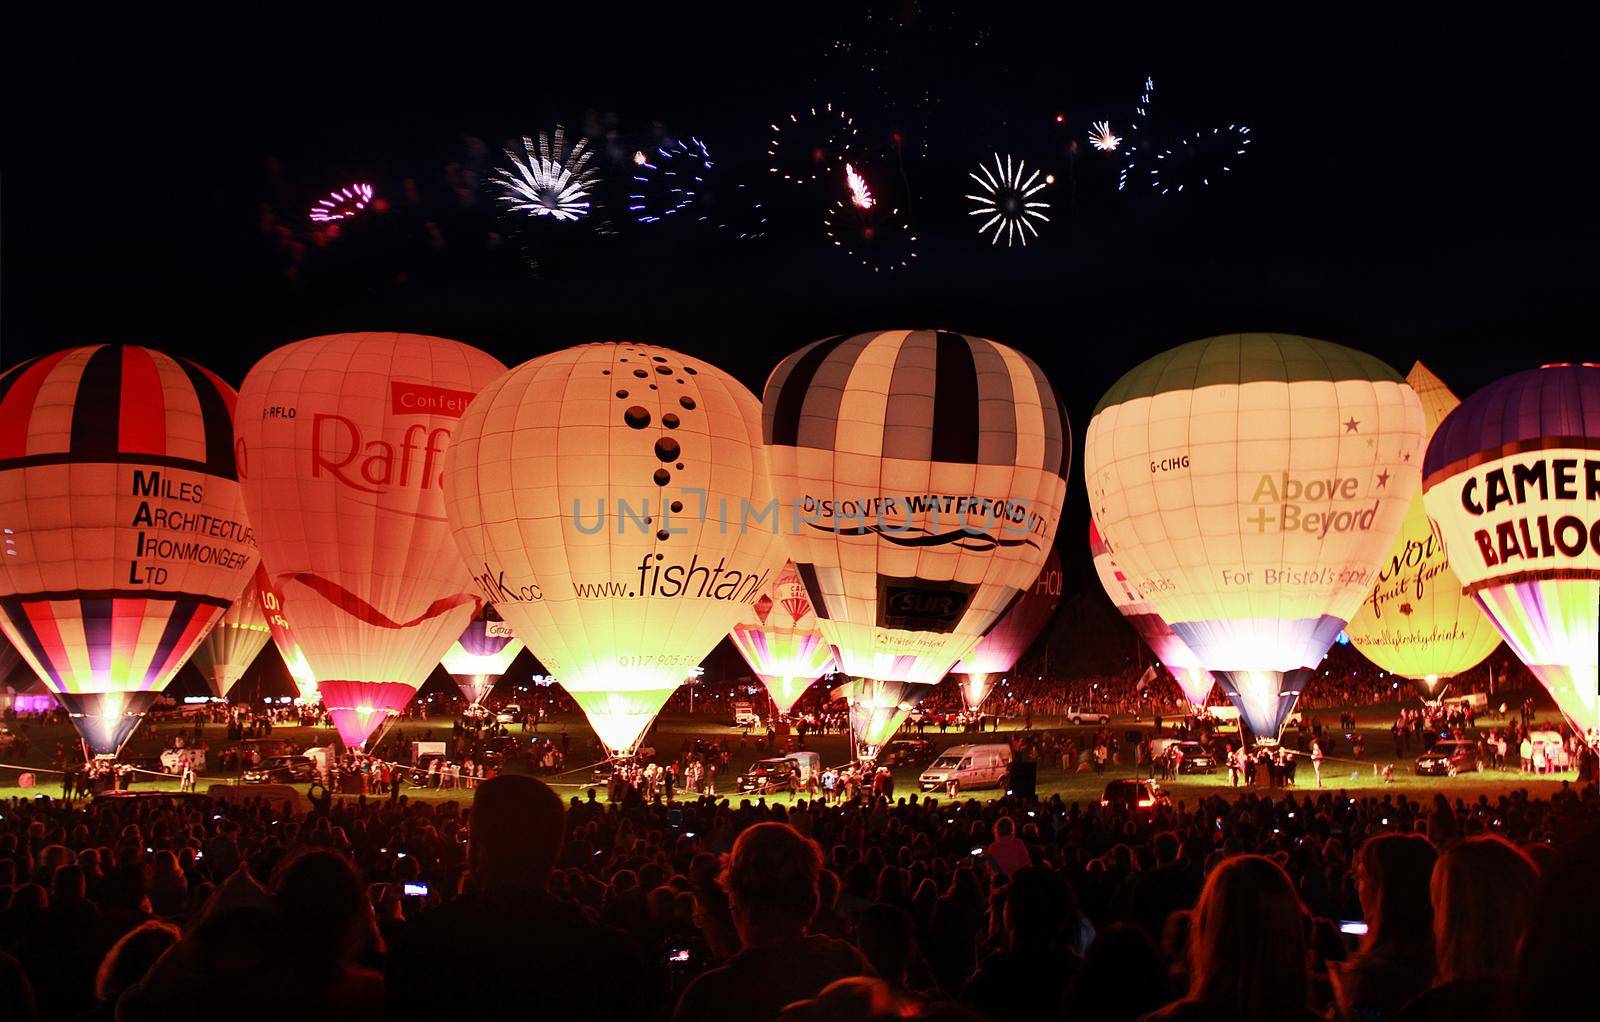 Bristol balloons lined up for the festival fireworks celebration at night, Bristol, UK. High quality photo.